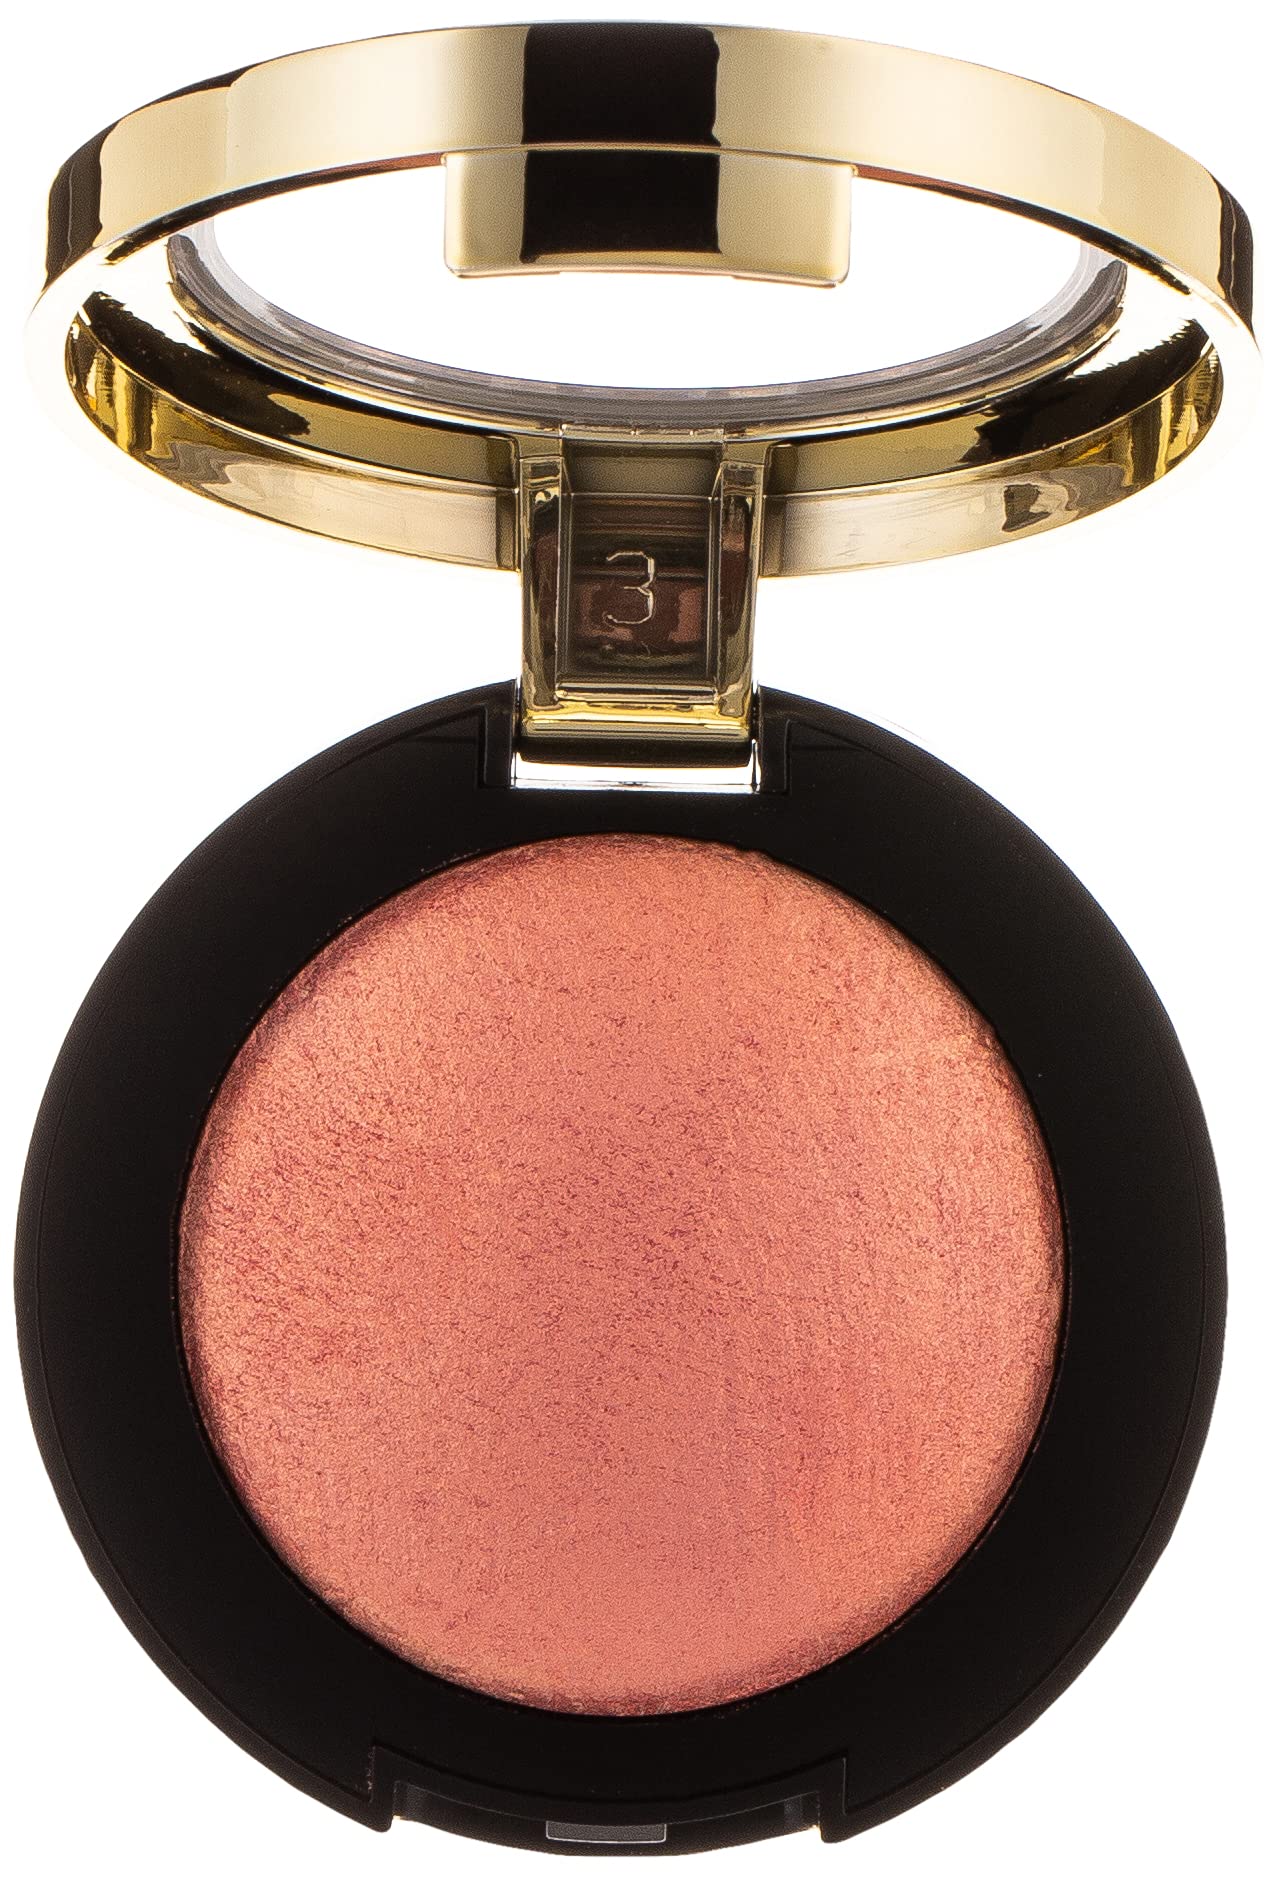 Milani Baked Blush - Bella Bellini (0.12 Ounce) Vegan, Cruelty-Free Powder Blush - Shape, Contour & Highlight Face for a Shimmer